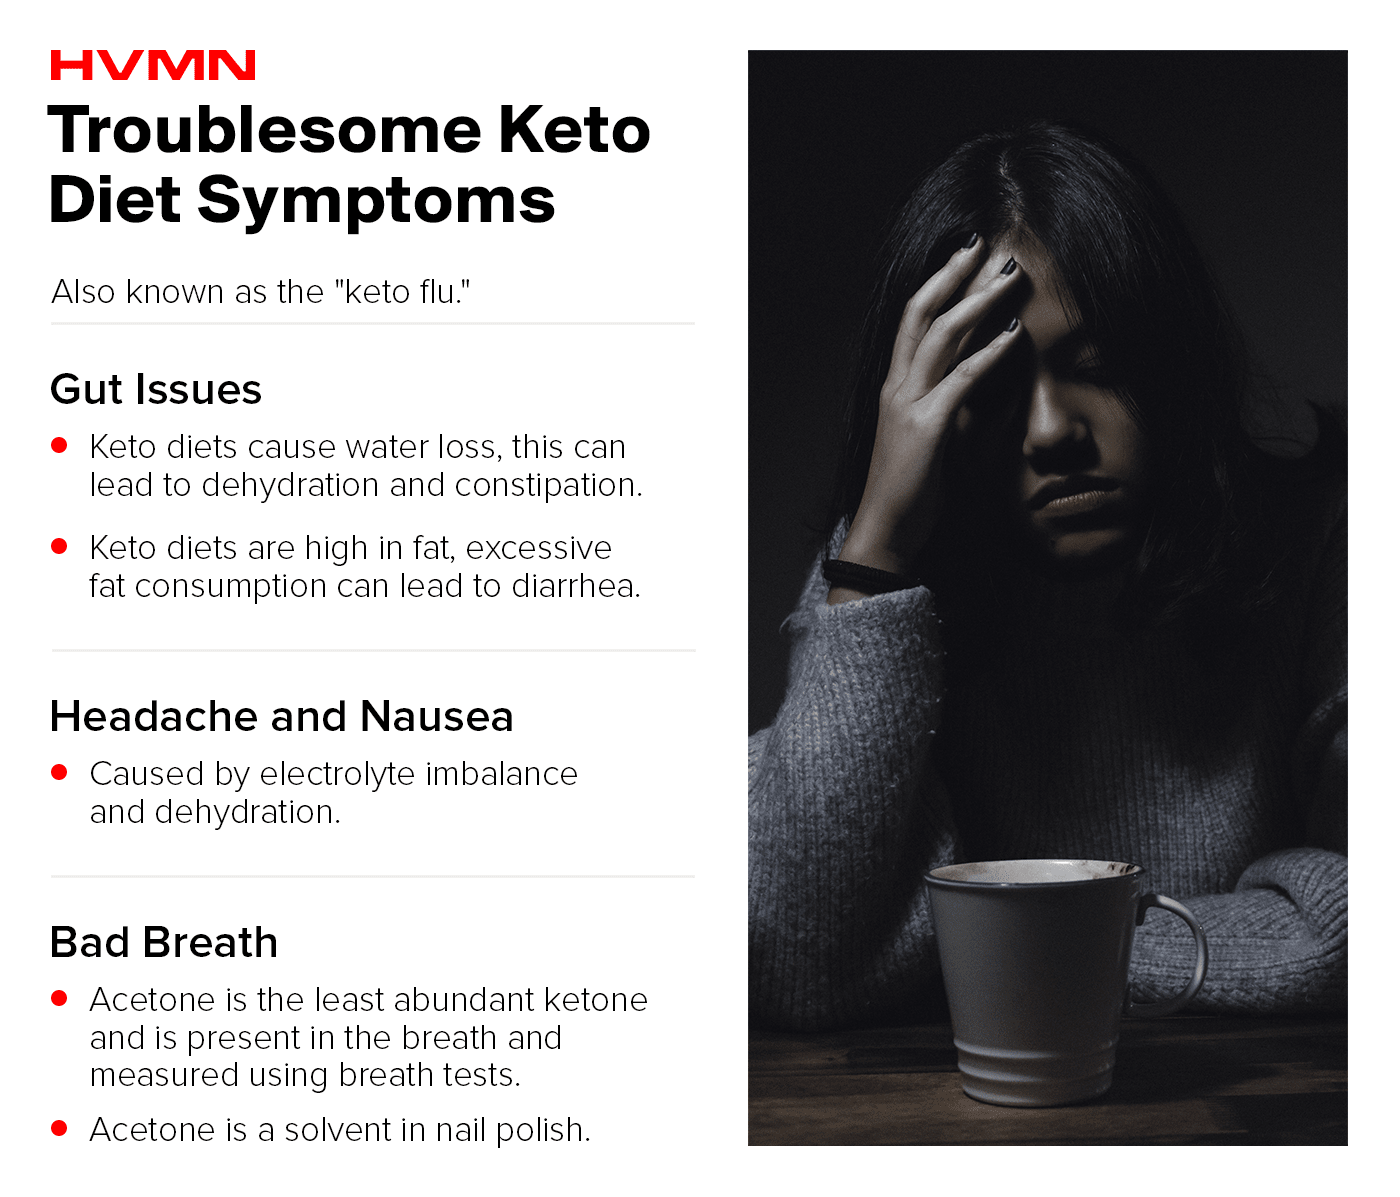 an image of a woman holding her head in discomfort from negative symptoms of the keto diet